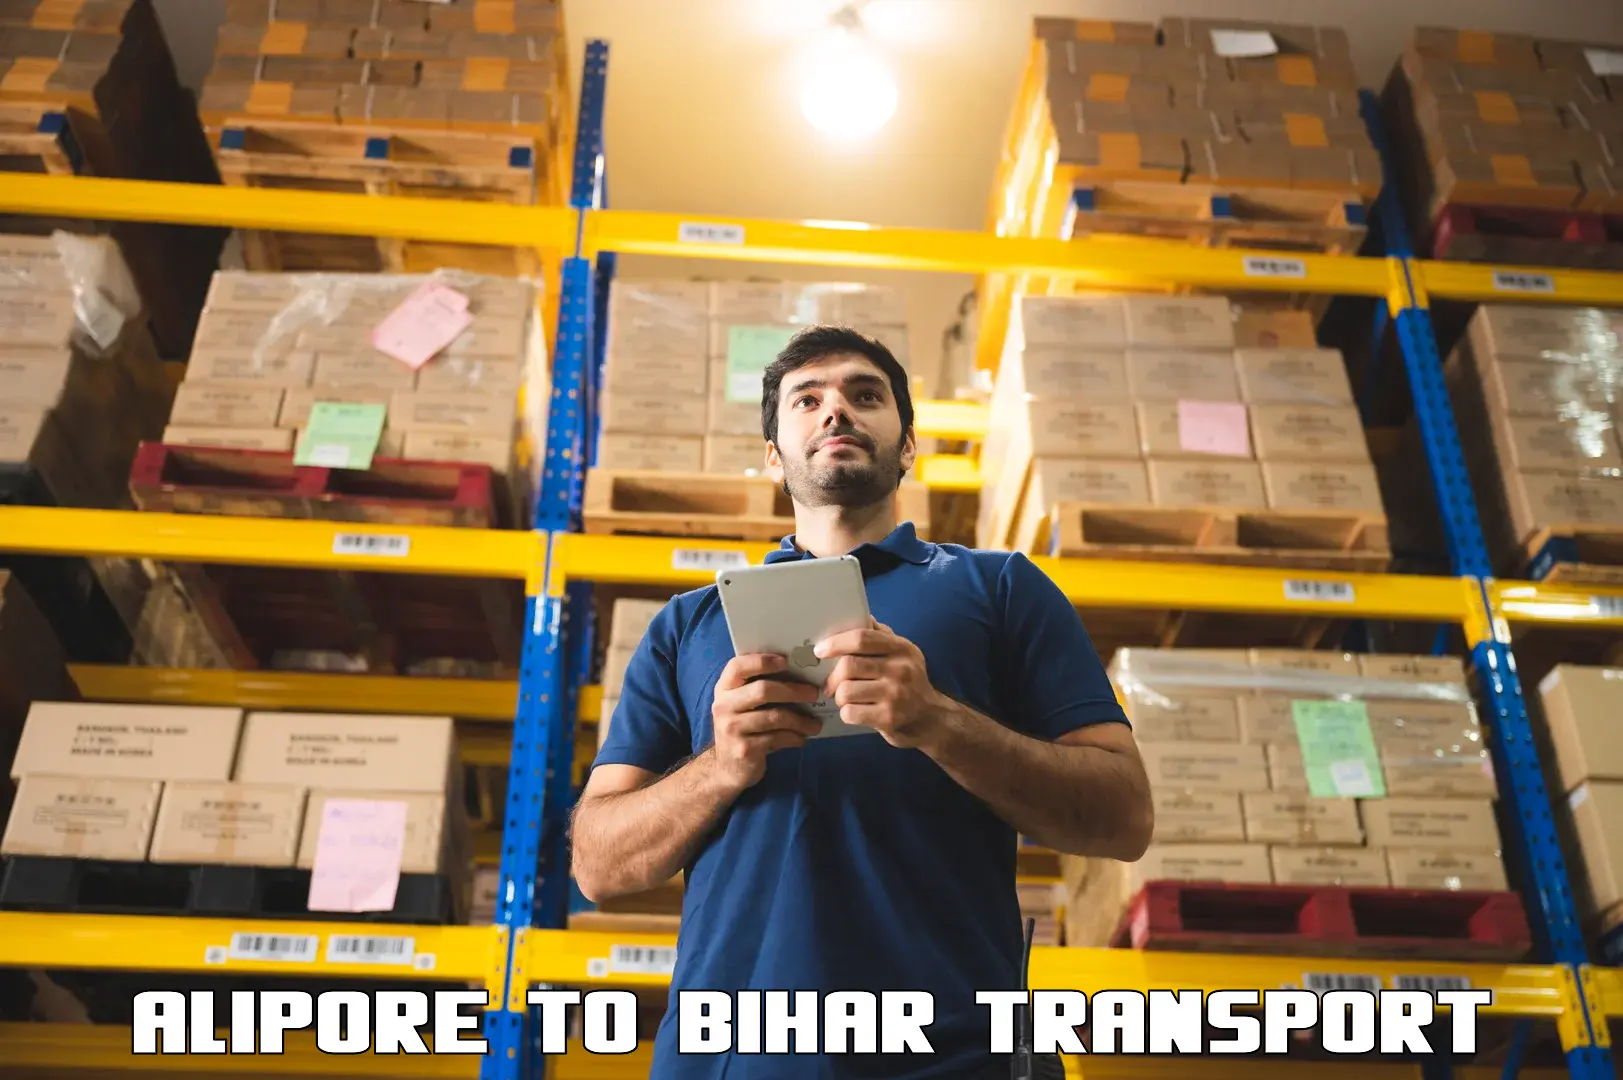 Express transport services in Alipore to Bihar